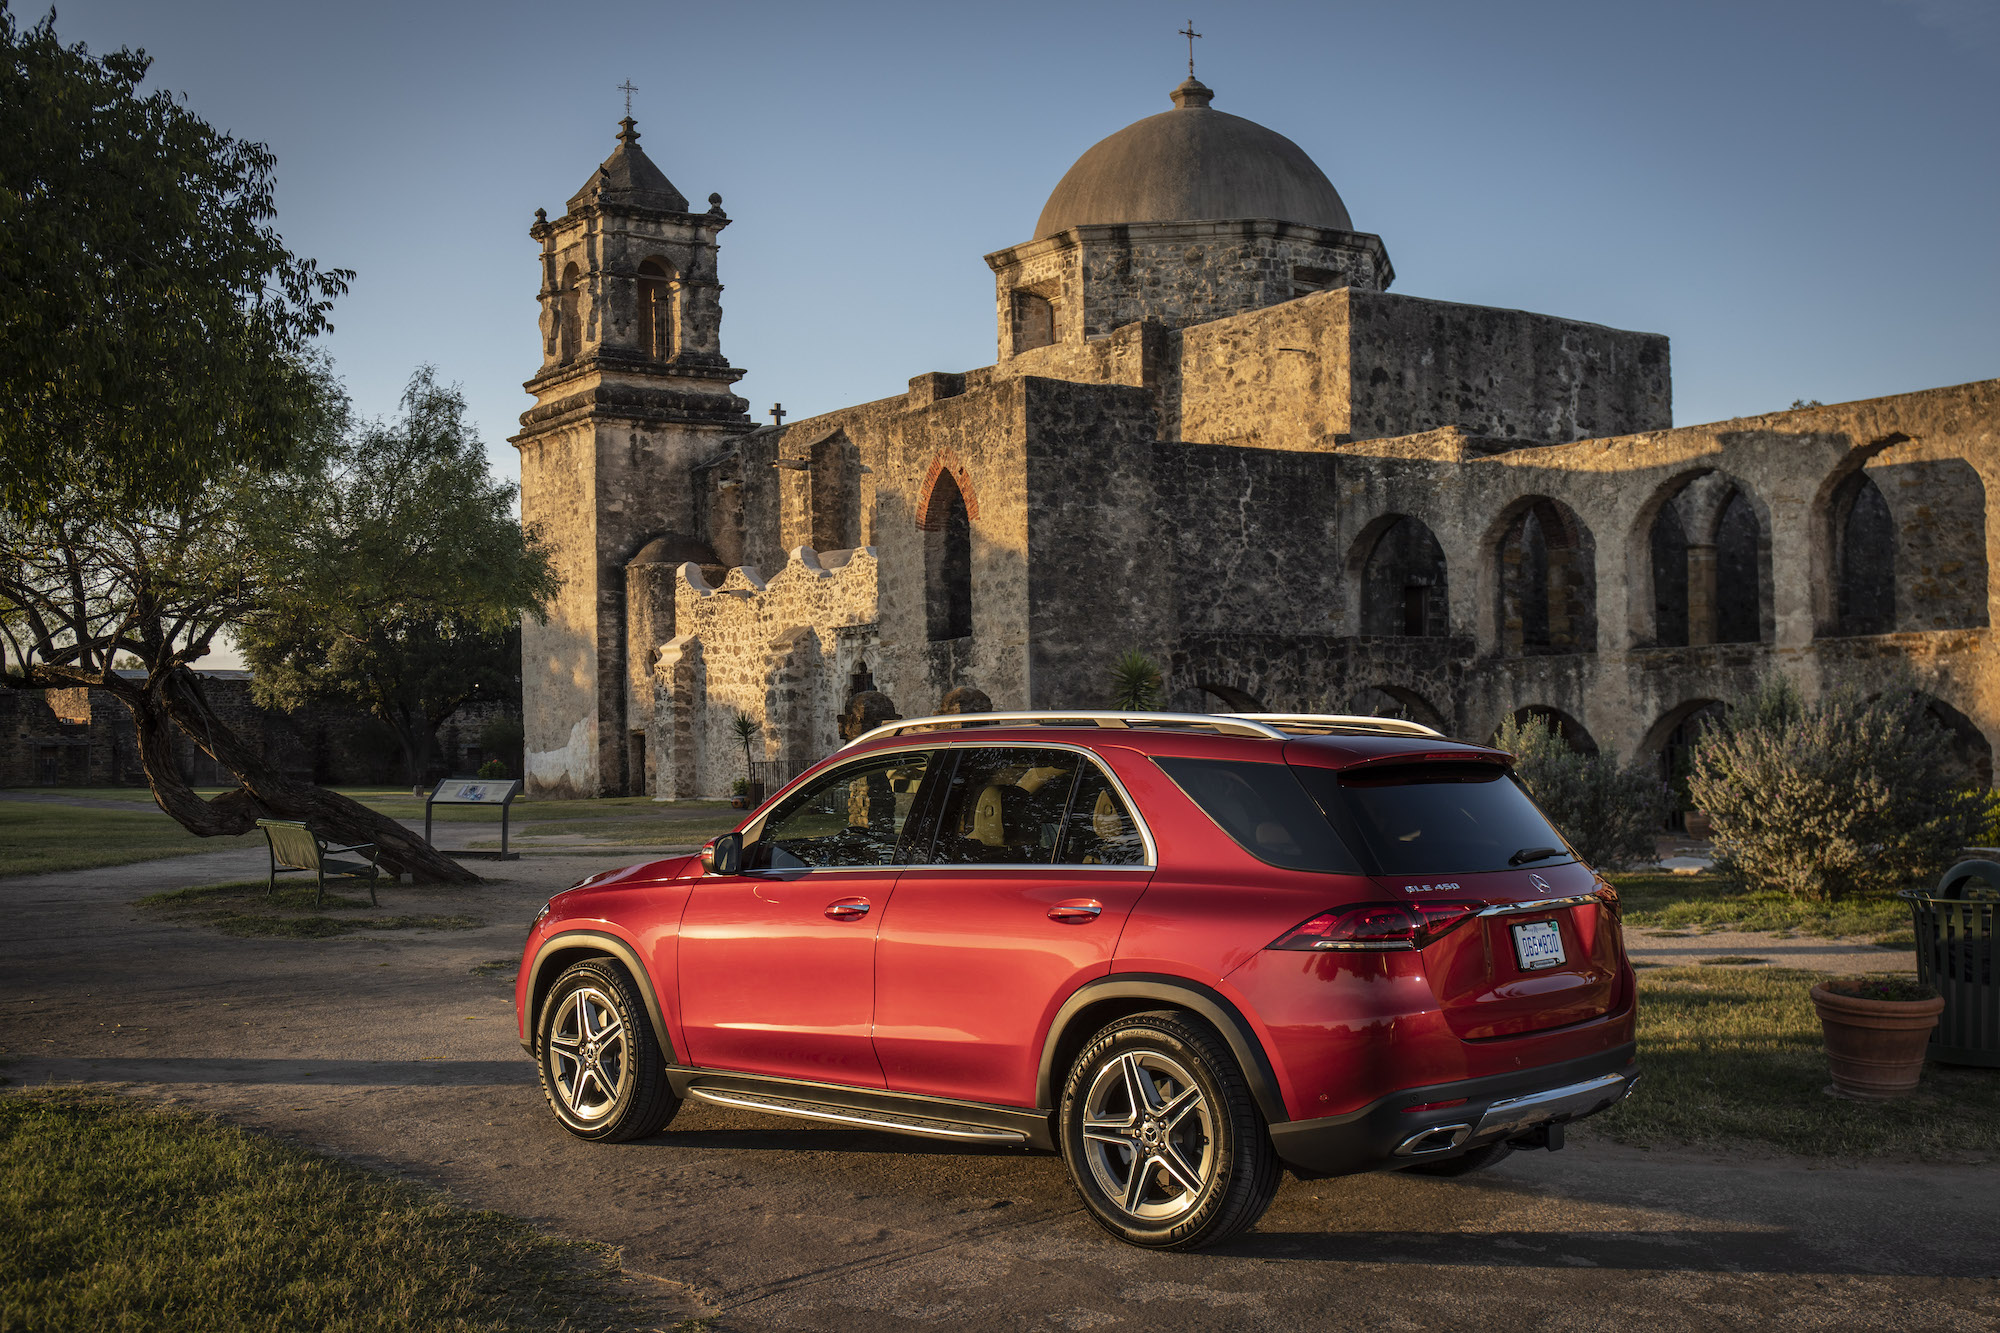 A red 2020 Mercedes-Benz GLE450 4MATIC compact luxury SUV parked outside the historic San José y San Miguel de Aguayo in San Antonio, Texas